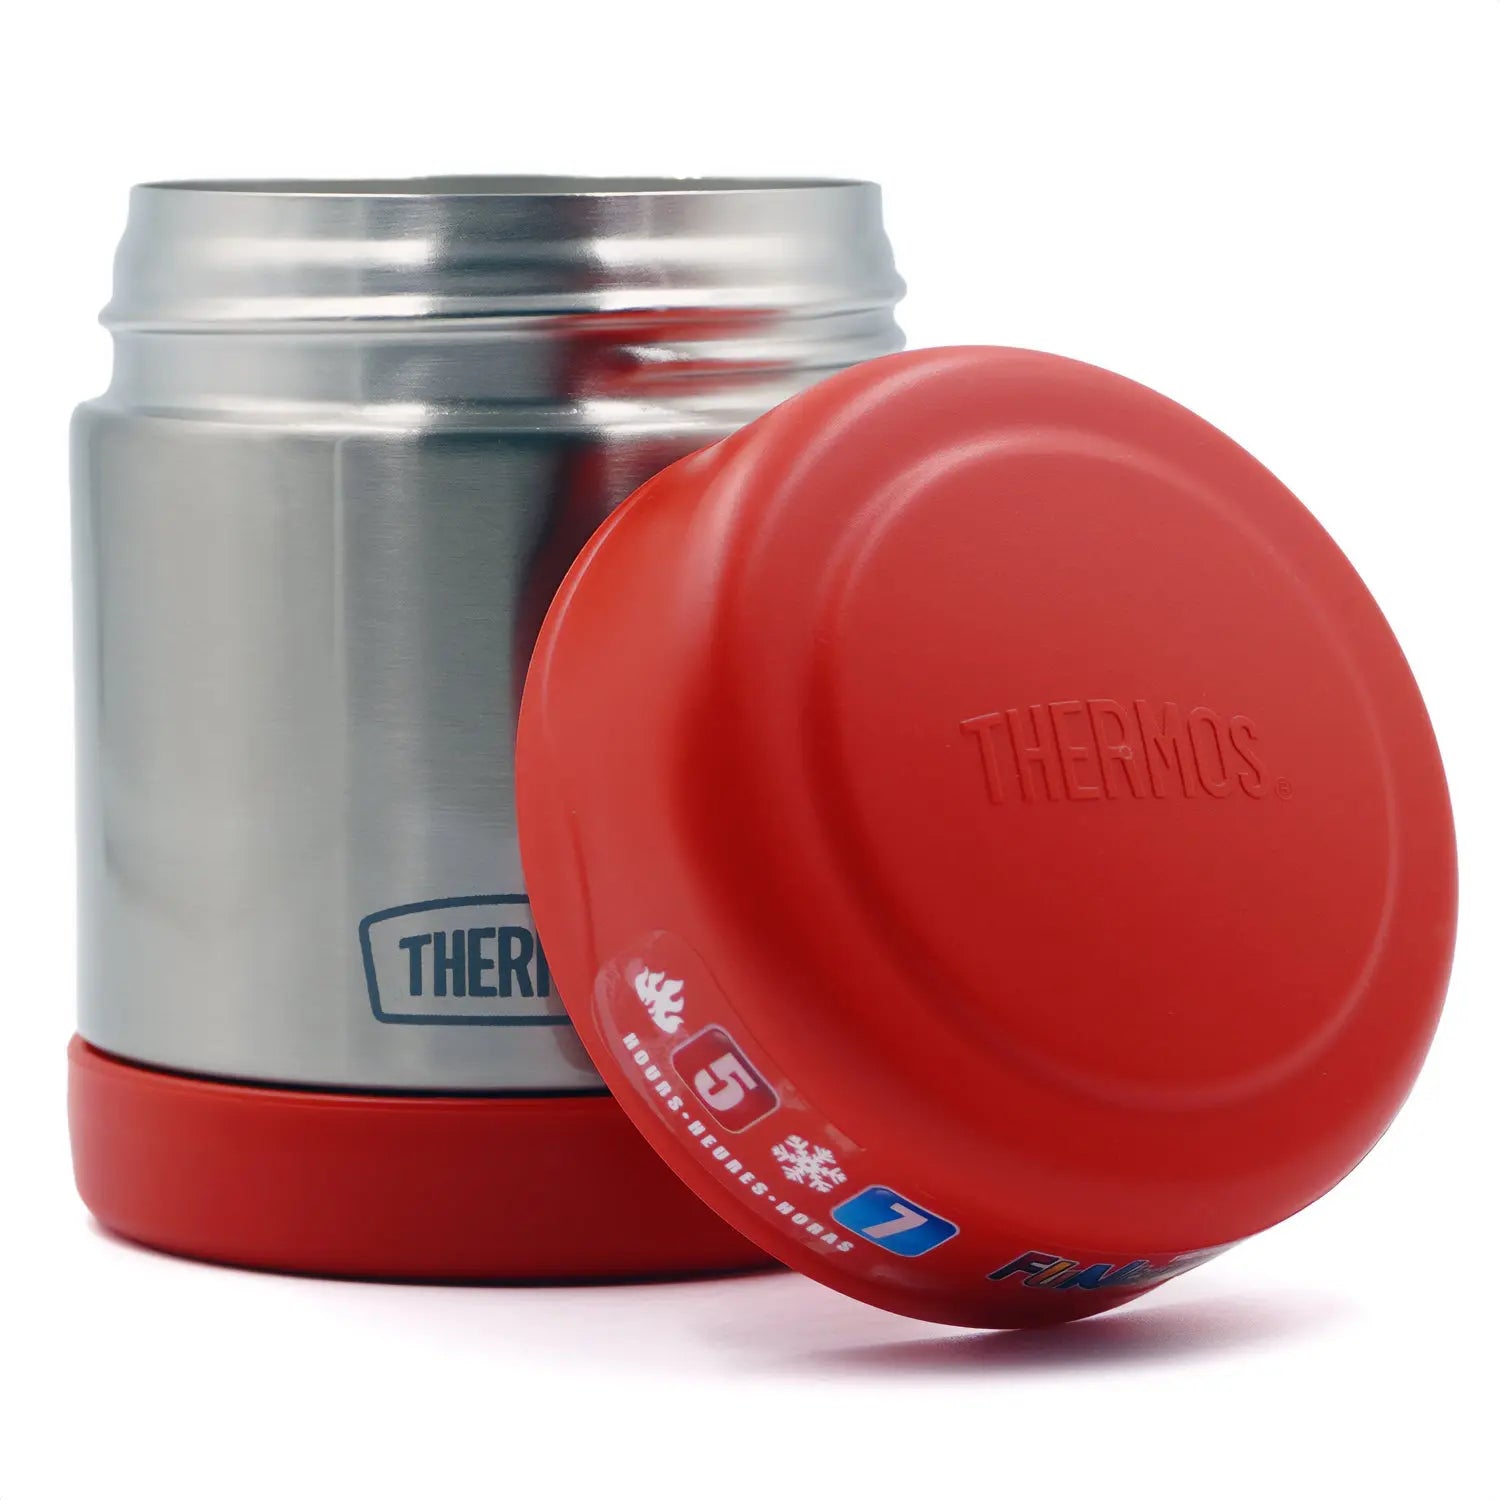 Thermos 10 oz. Vacuum Insulated Stainless Steel Food Jar - Red/Stainless Steel Thermos